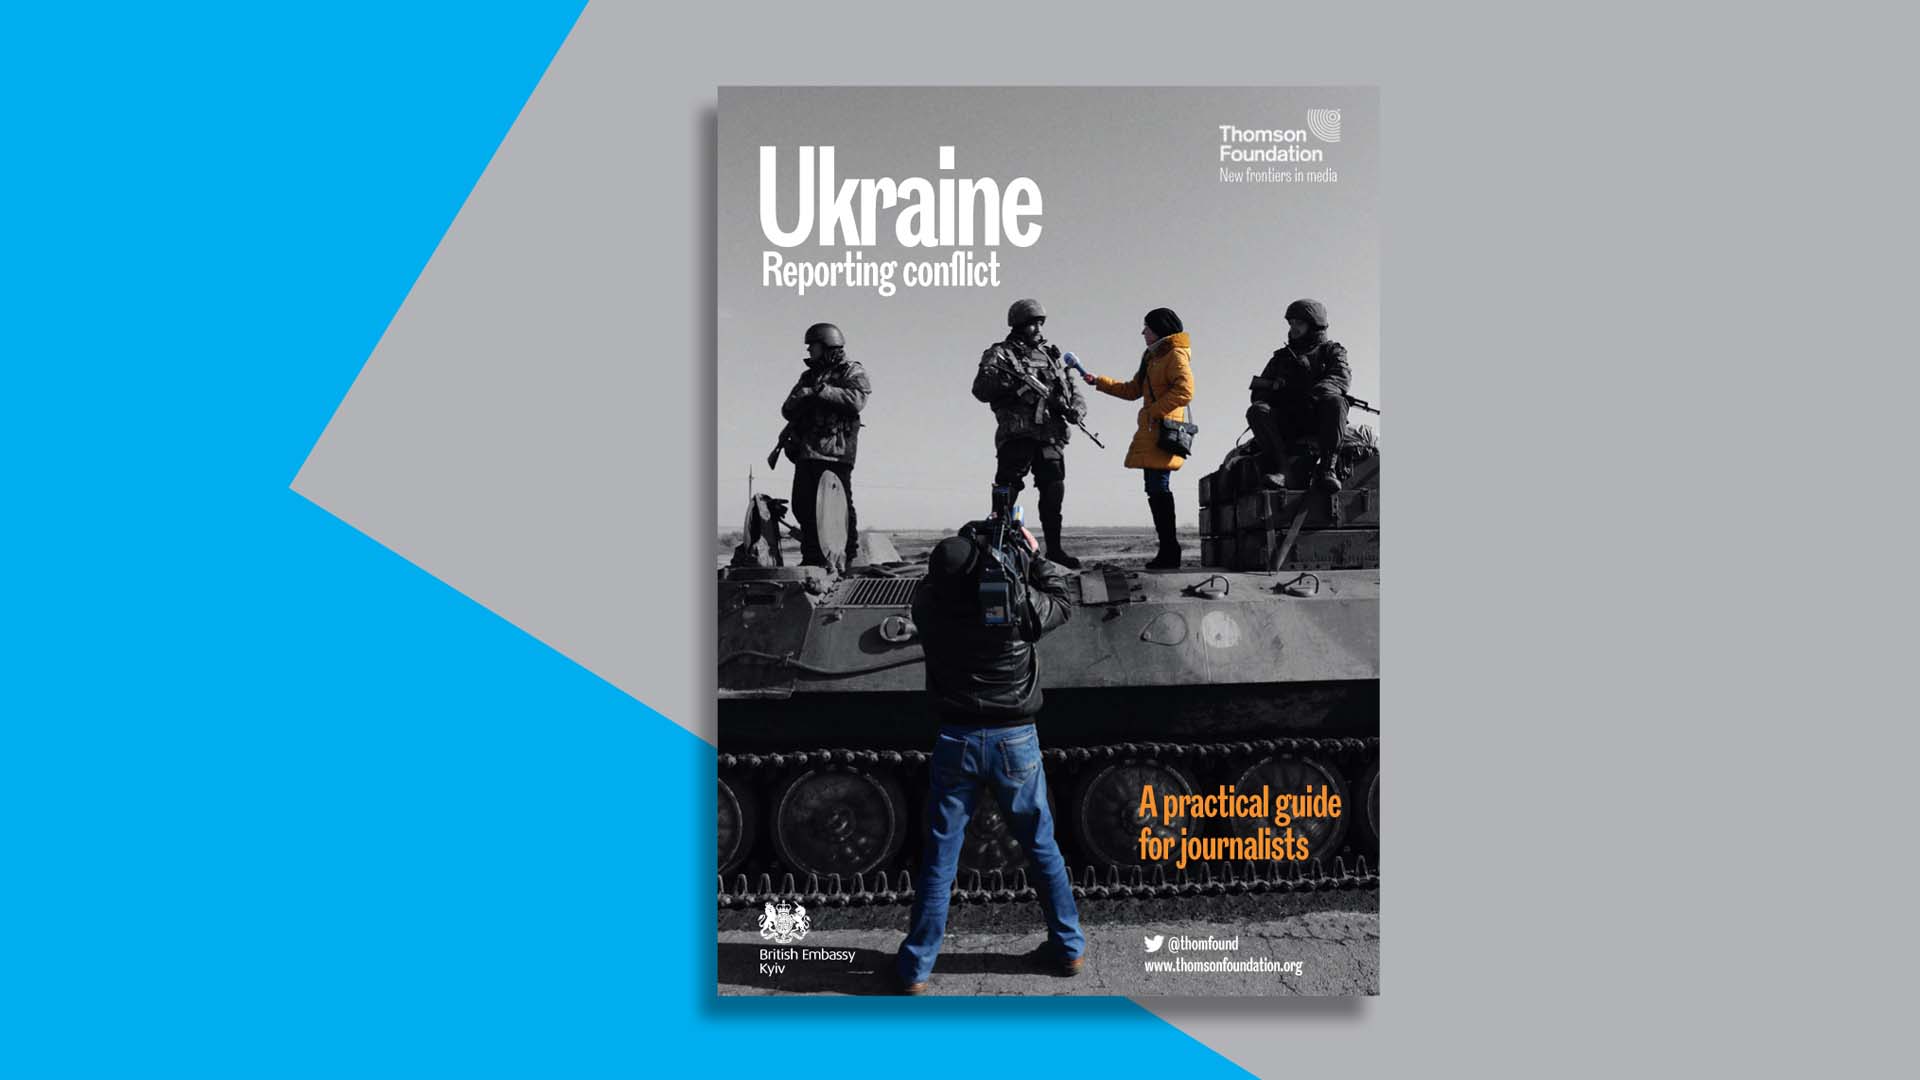 This short publication aims to provide some pointers and practical advice on how to stay safe while reporting in Ukraine